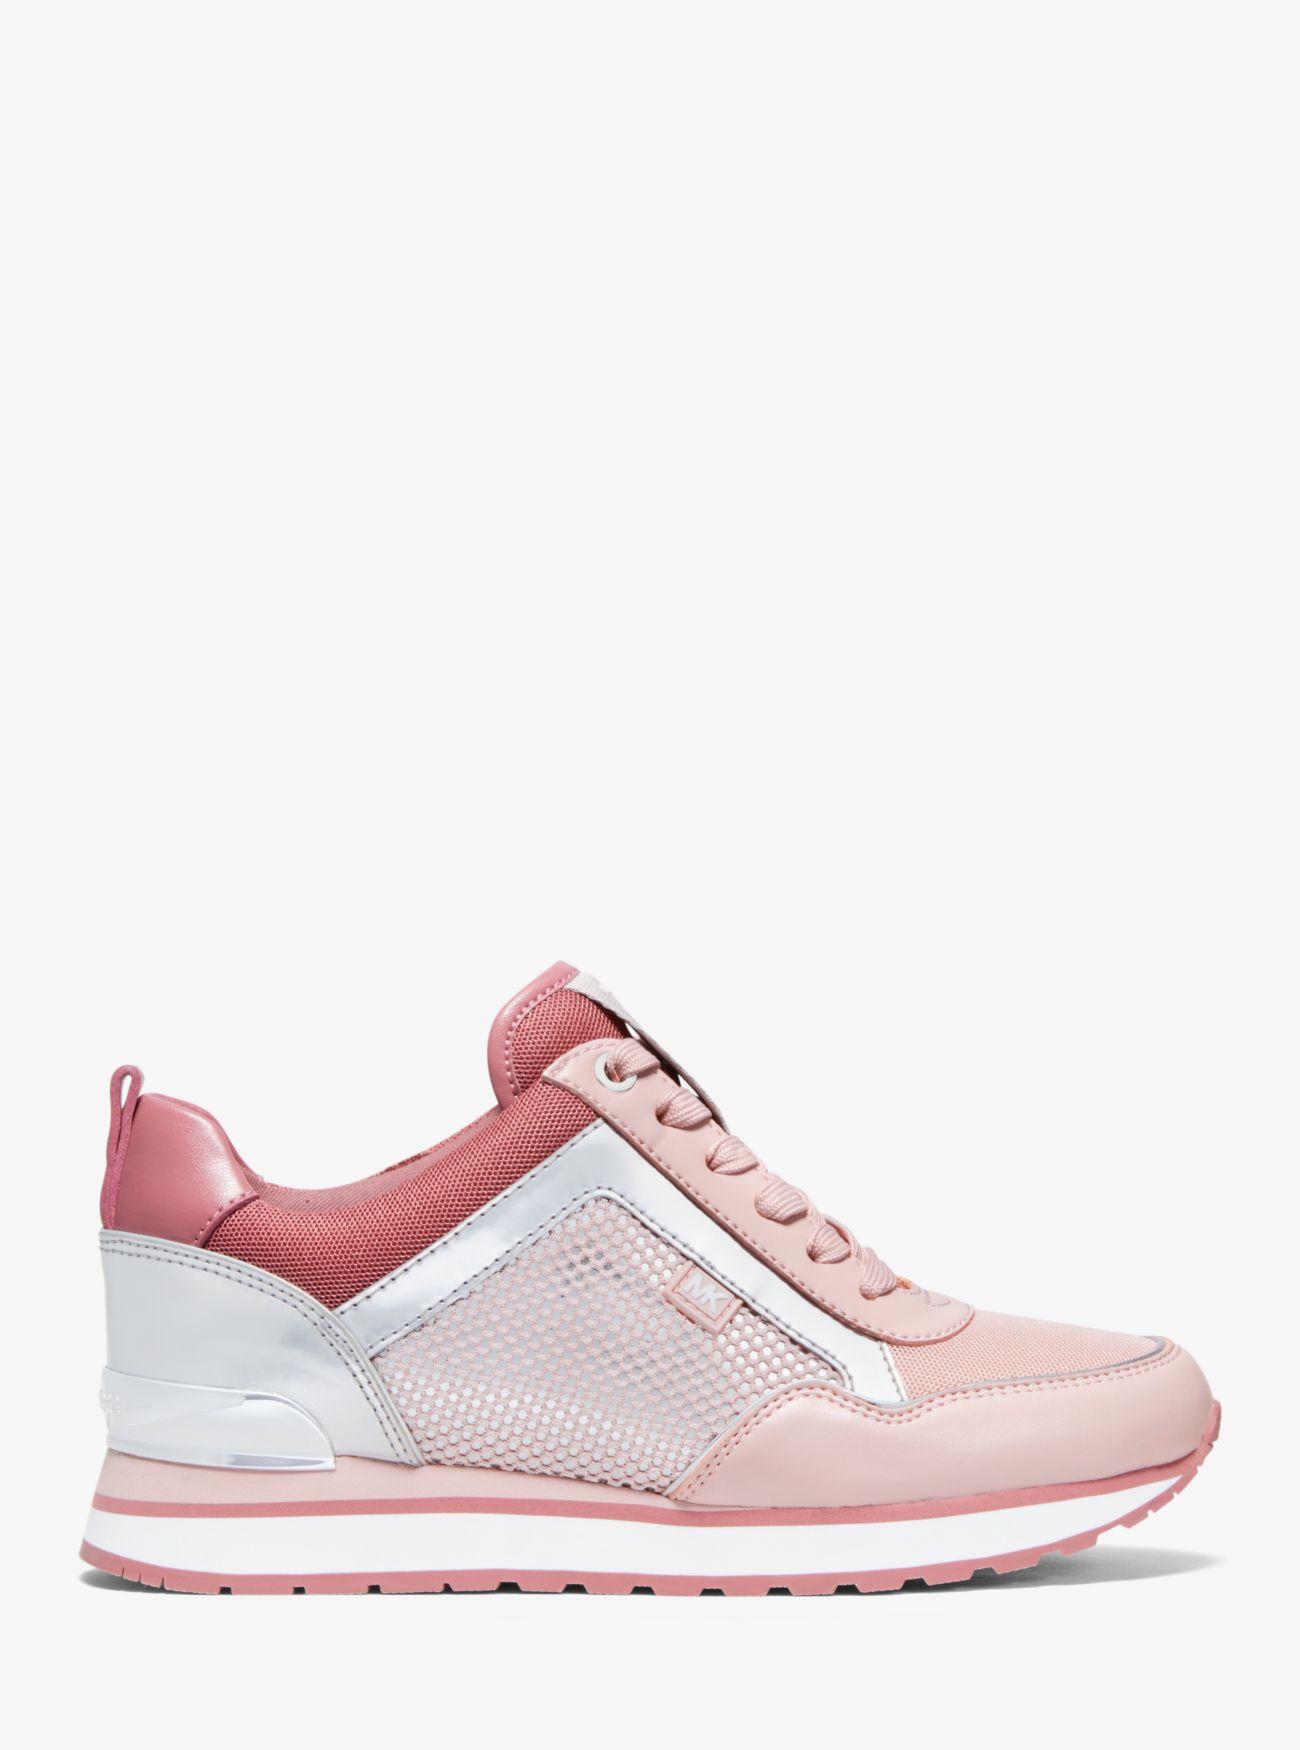 michael kors maddy trainer shoes